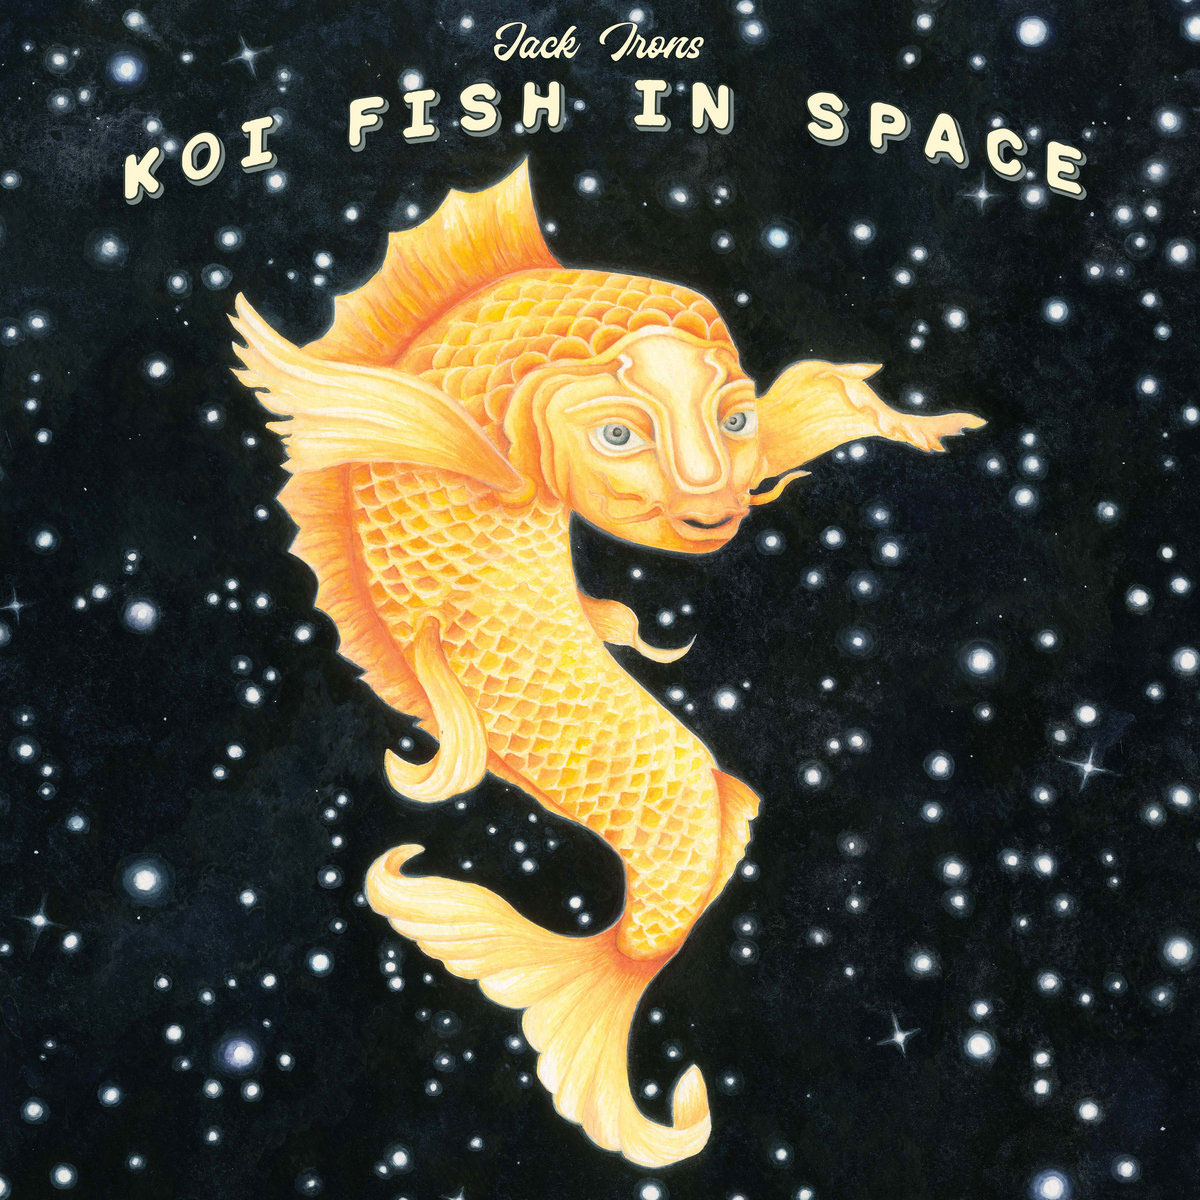 Jack Irons 'Koi Fish In Space'